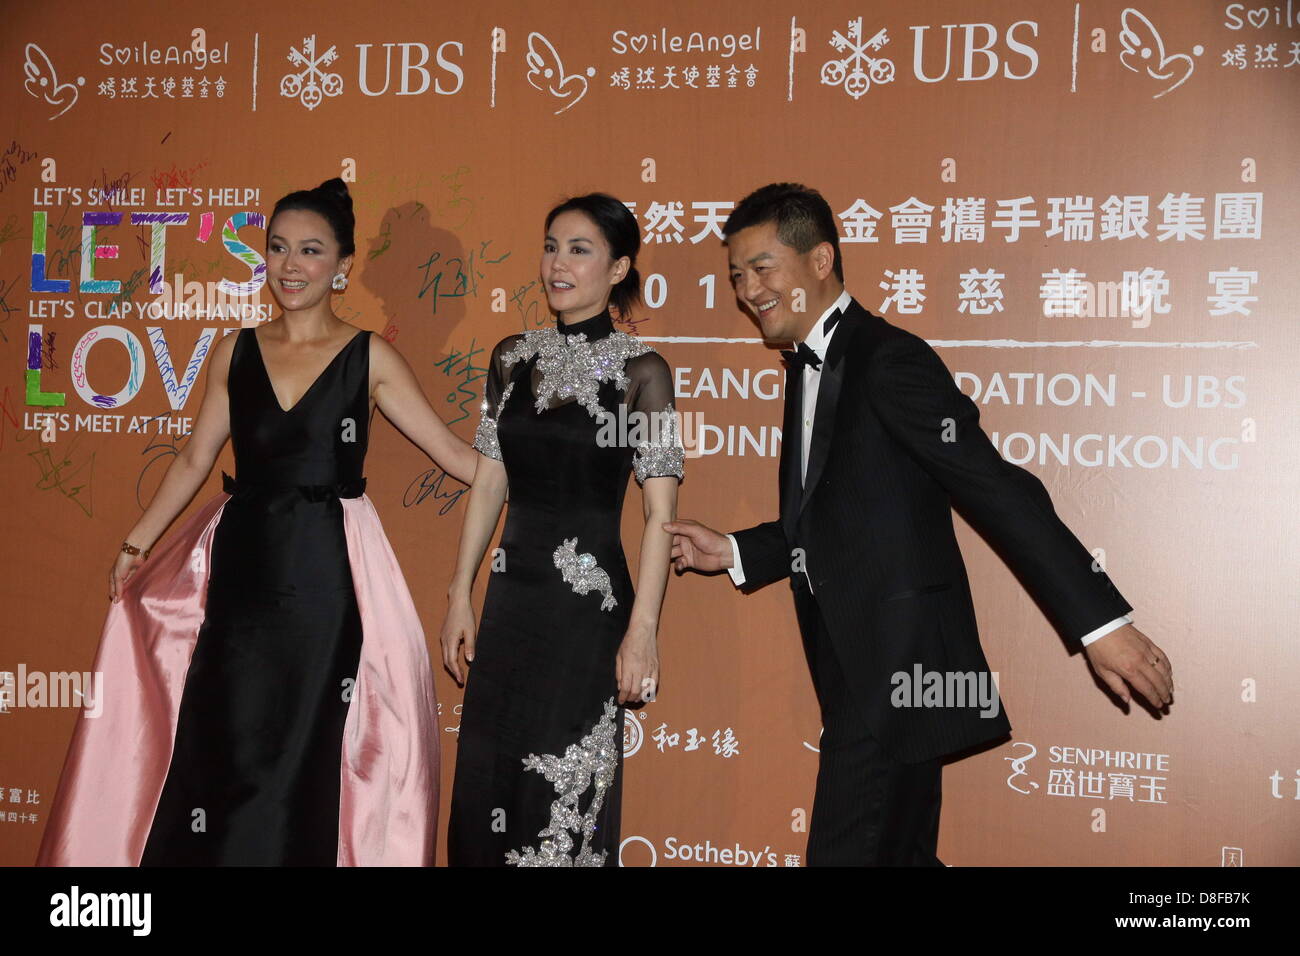 Carina Lau and Faye Wong attended Smileangel Foundation-UBS Gala Dinner in Hong Kong, China on Monday May 27, 2013. Stock Photo